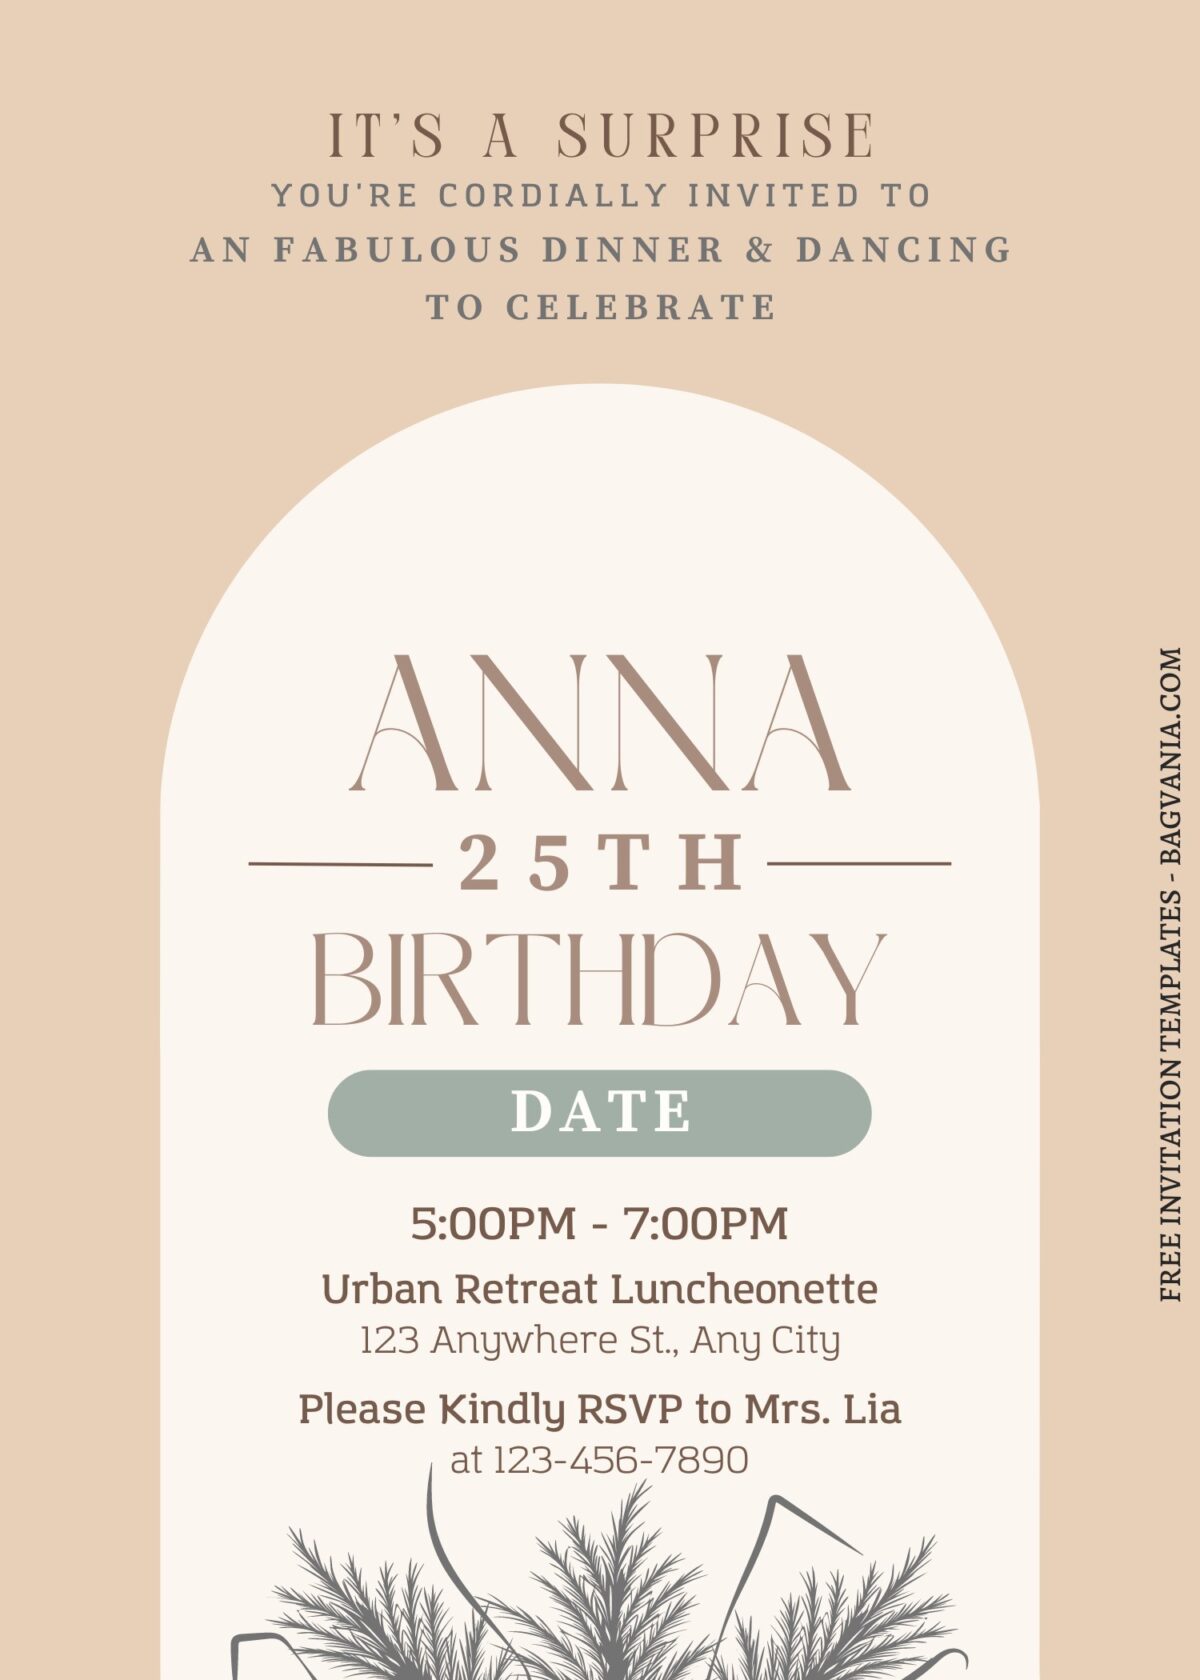 (Free) 9+ Aesthetic Summer Love Canva Birthday Invitation Templates with wedding floral arch box